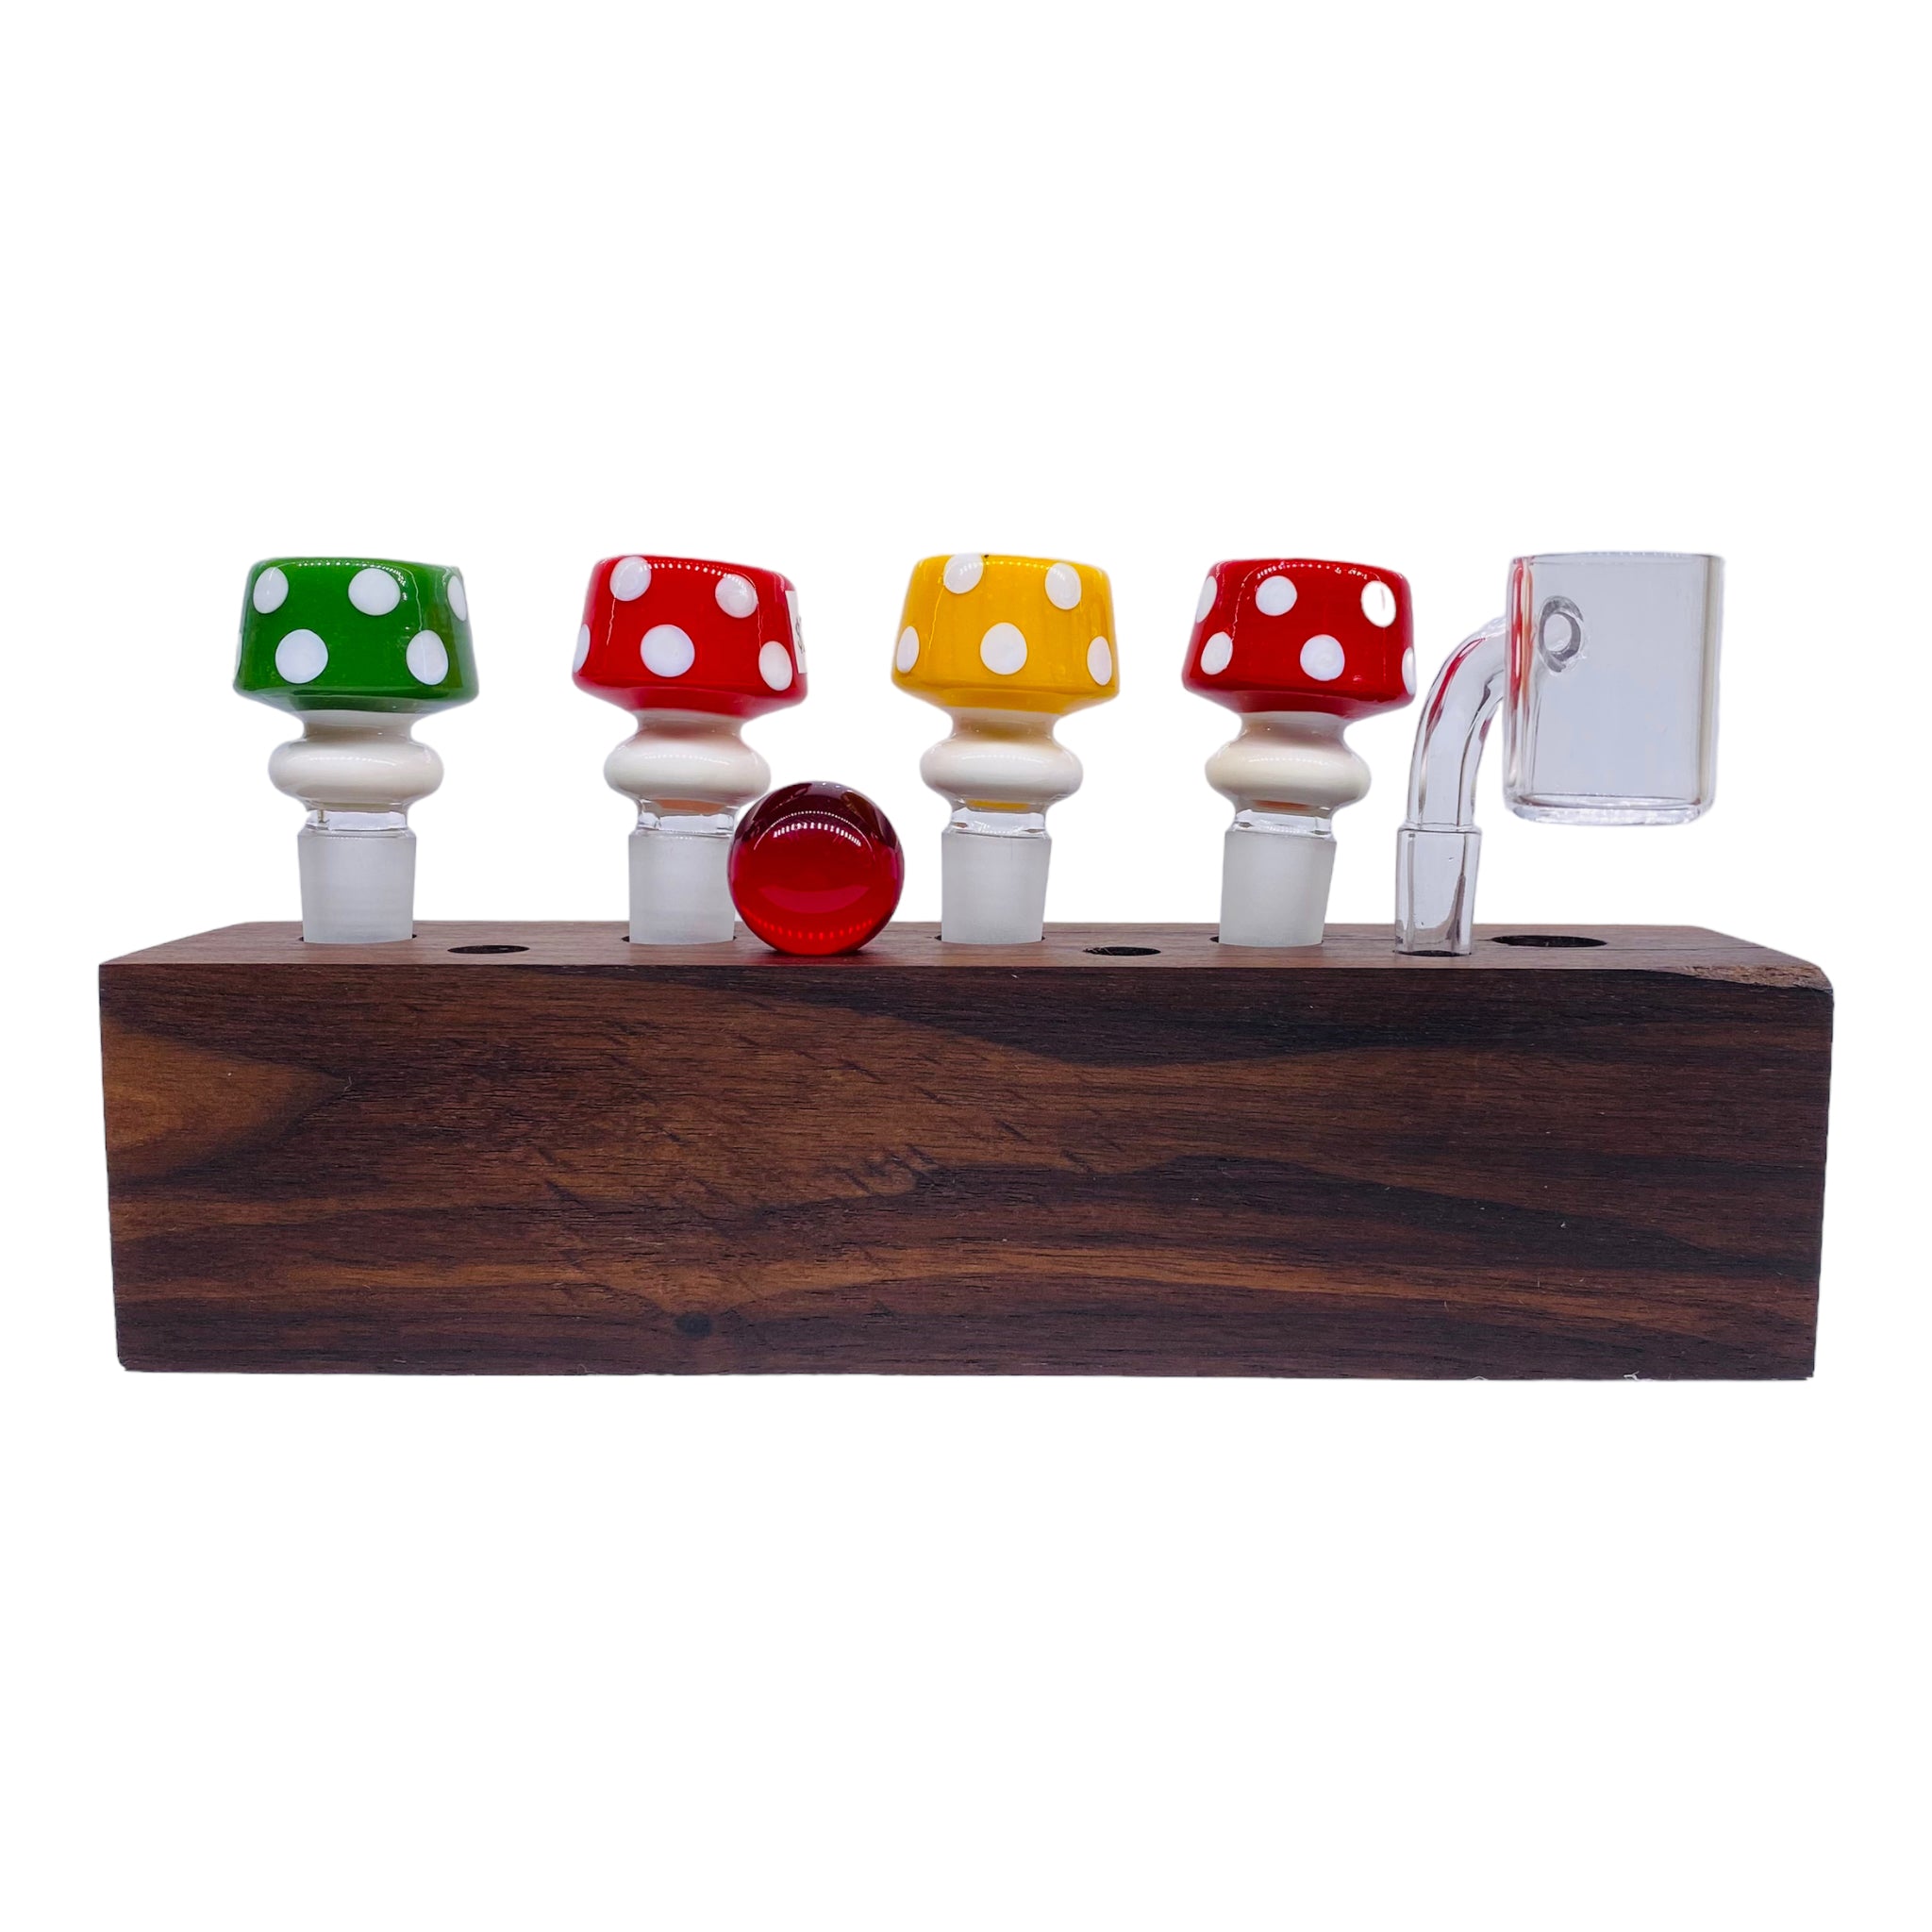 9 Hole Wood Display Stand Holder For 14mm And 10mm Bong Bowl Pieces Or Quartz Bangers